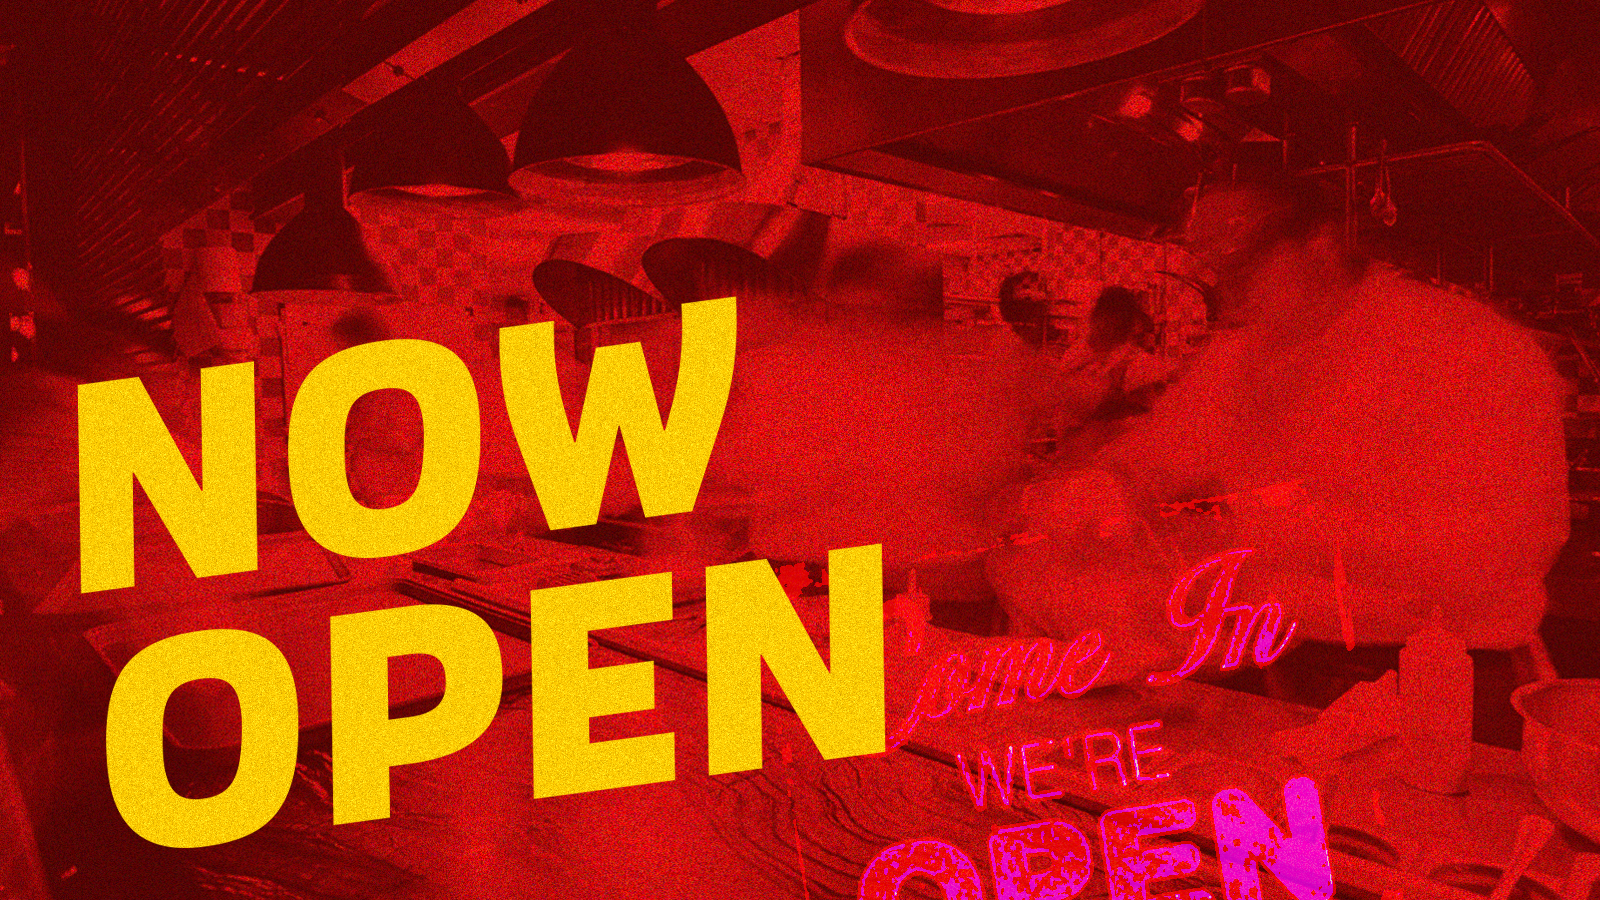 A bright red graphci design of the interior of a restaurant with yellow block letters reading “Now Open” on the left side. 